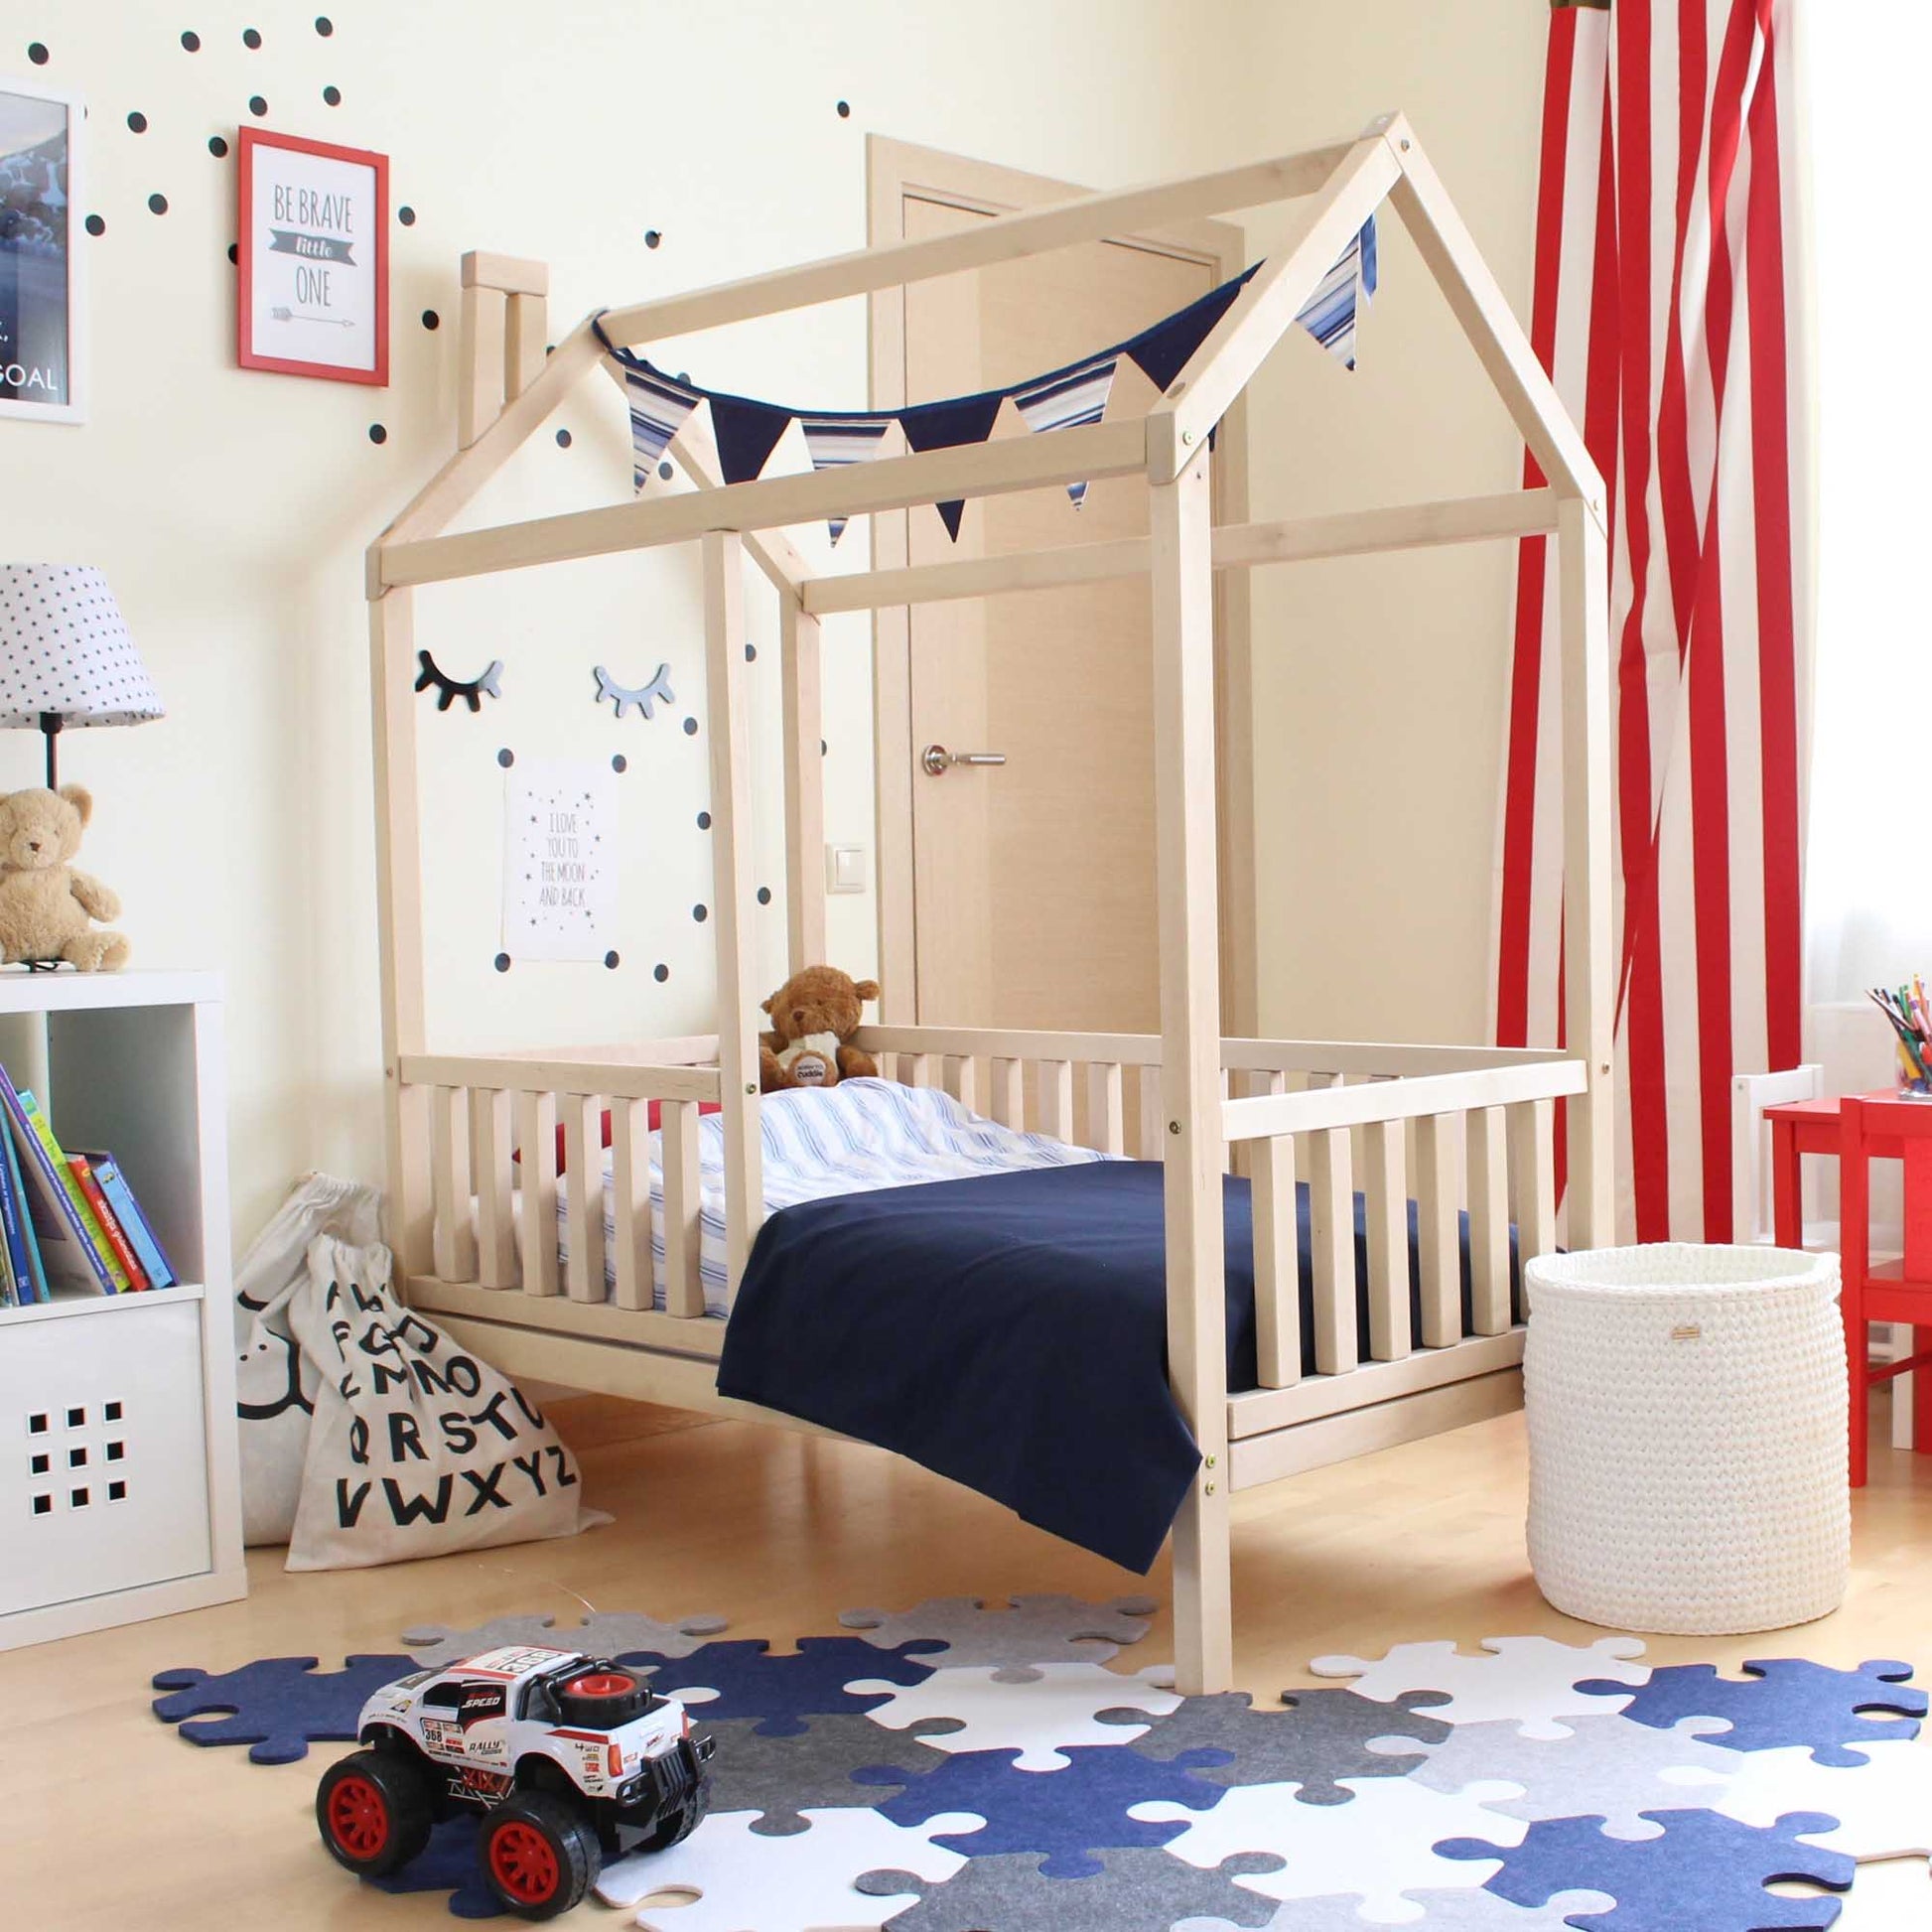 A Kids' house bed on legs with a fence in a child's room with wooden rails.